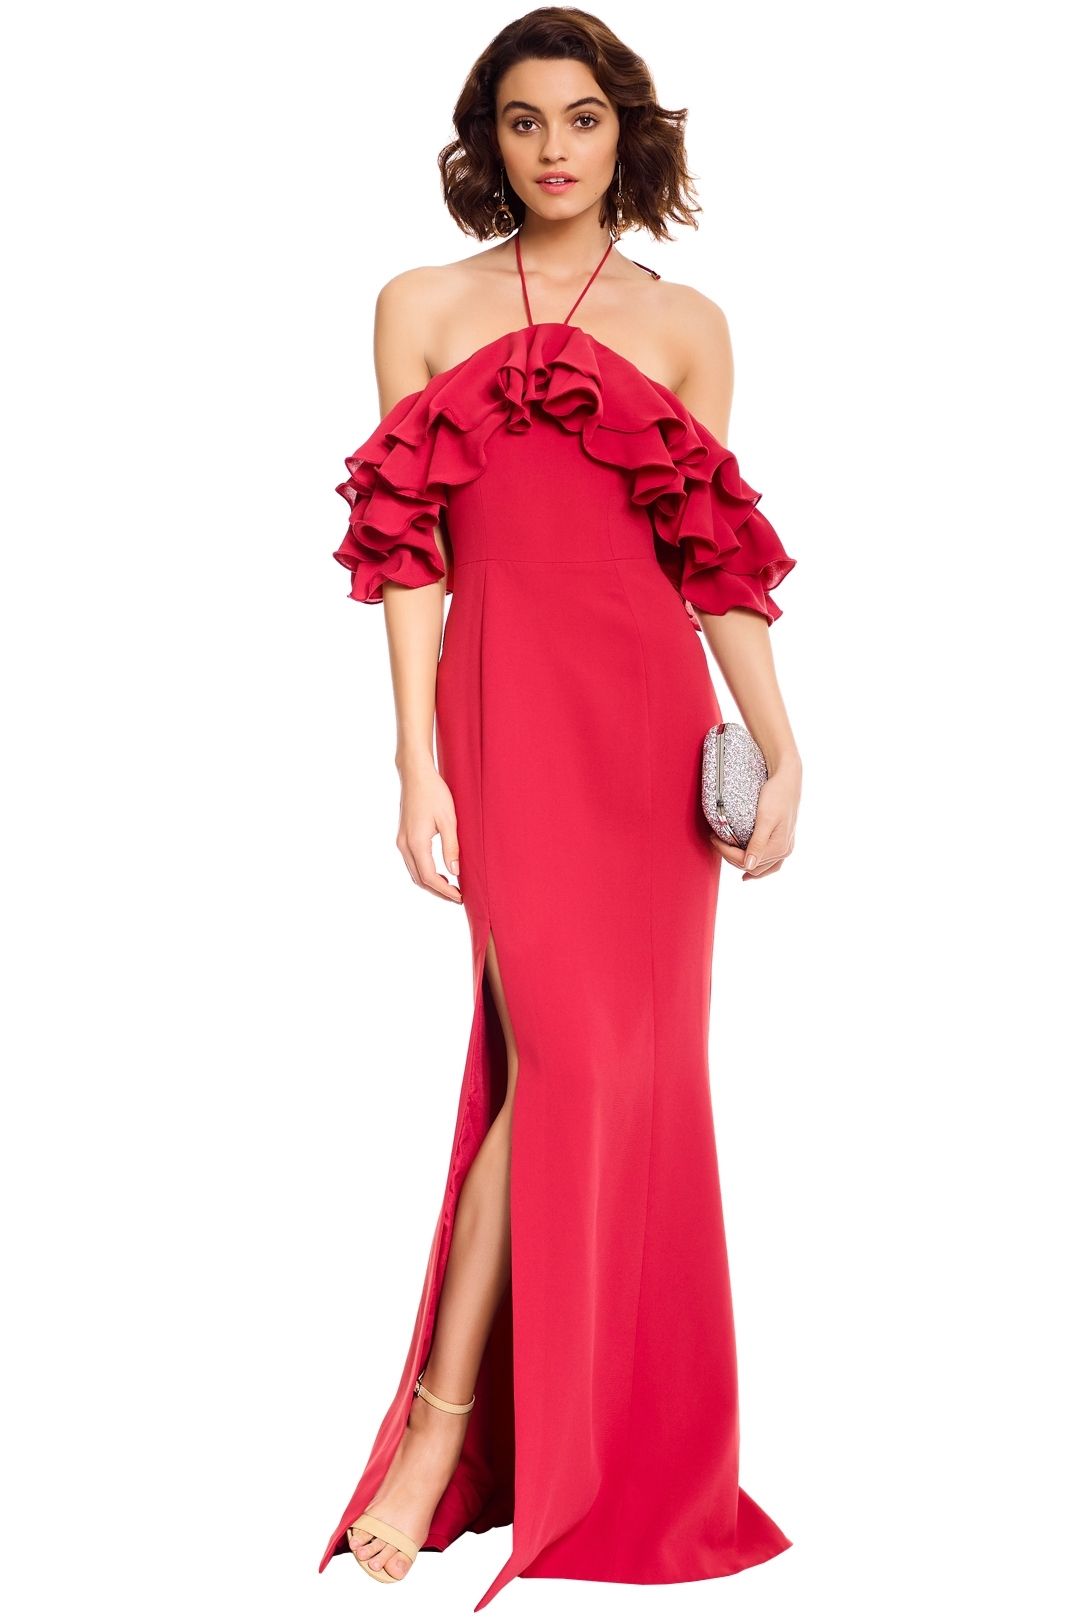 CMEO Collective - Immerse Gown - Rose - Front